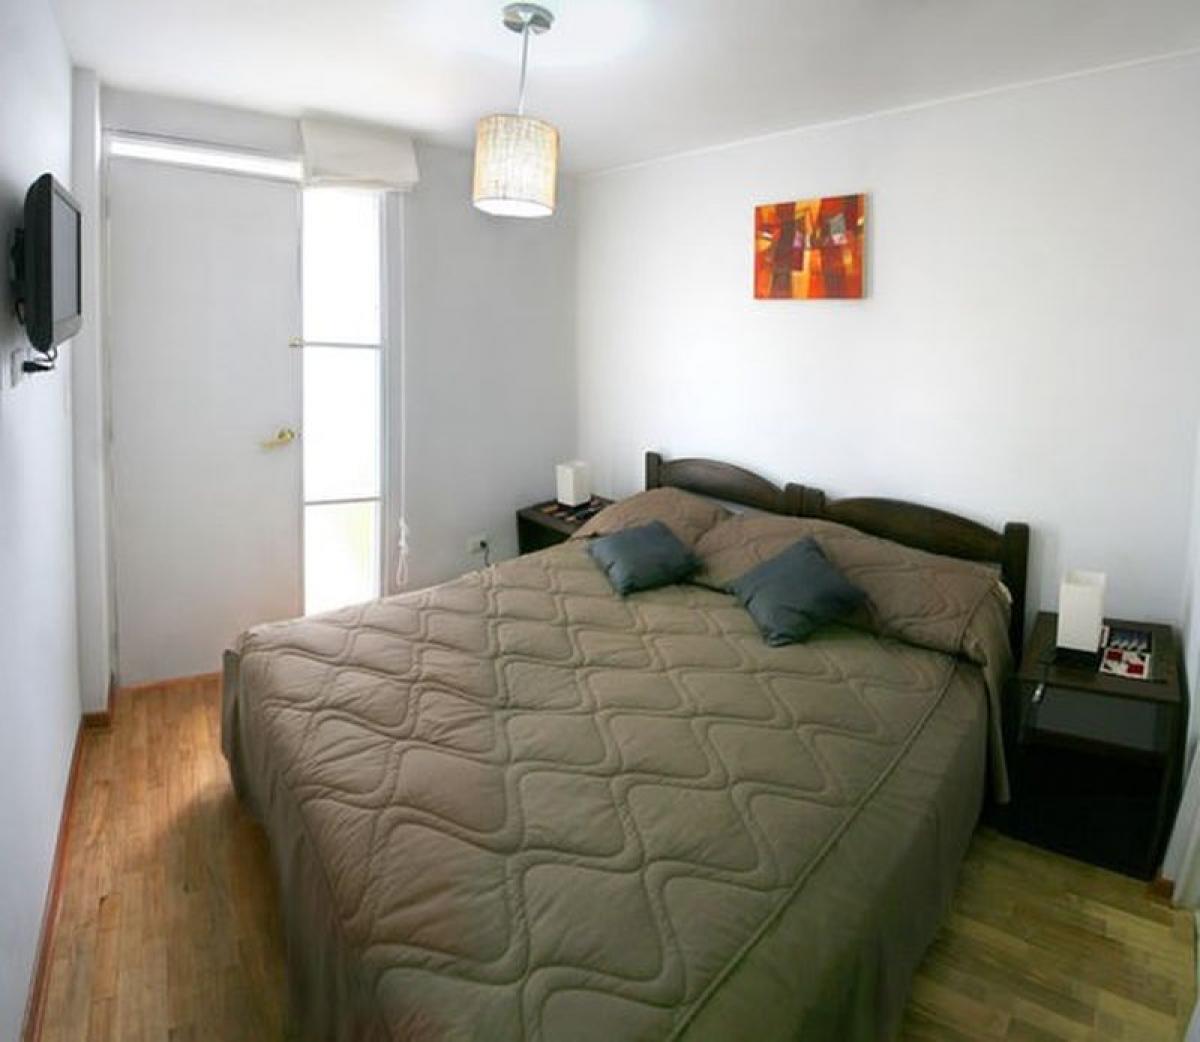 Picture of Apartment For Sale in Zarate, Buenos Aires, Argentina